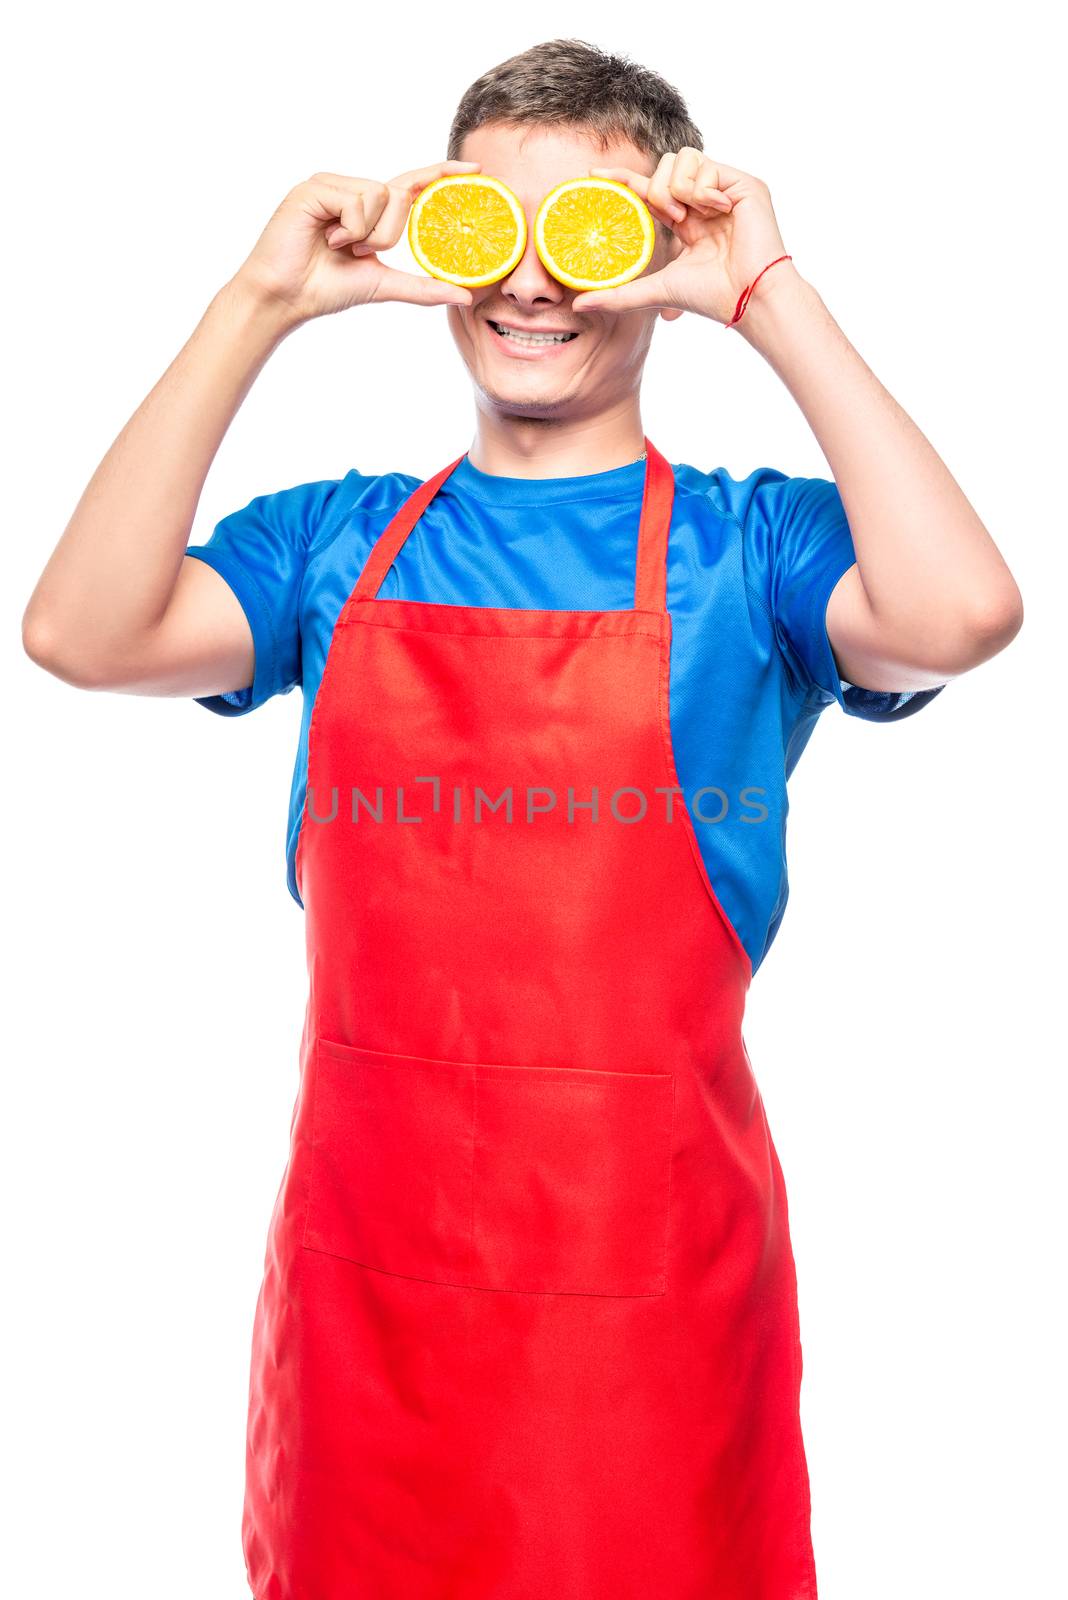 man in an apron fun photo with oranges on a white background